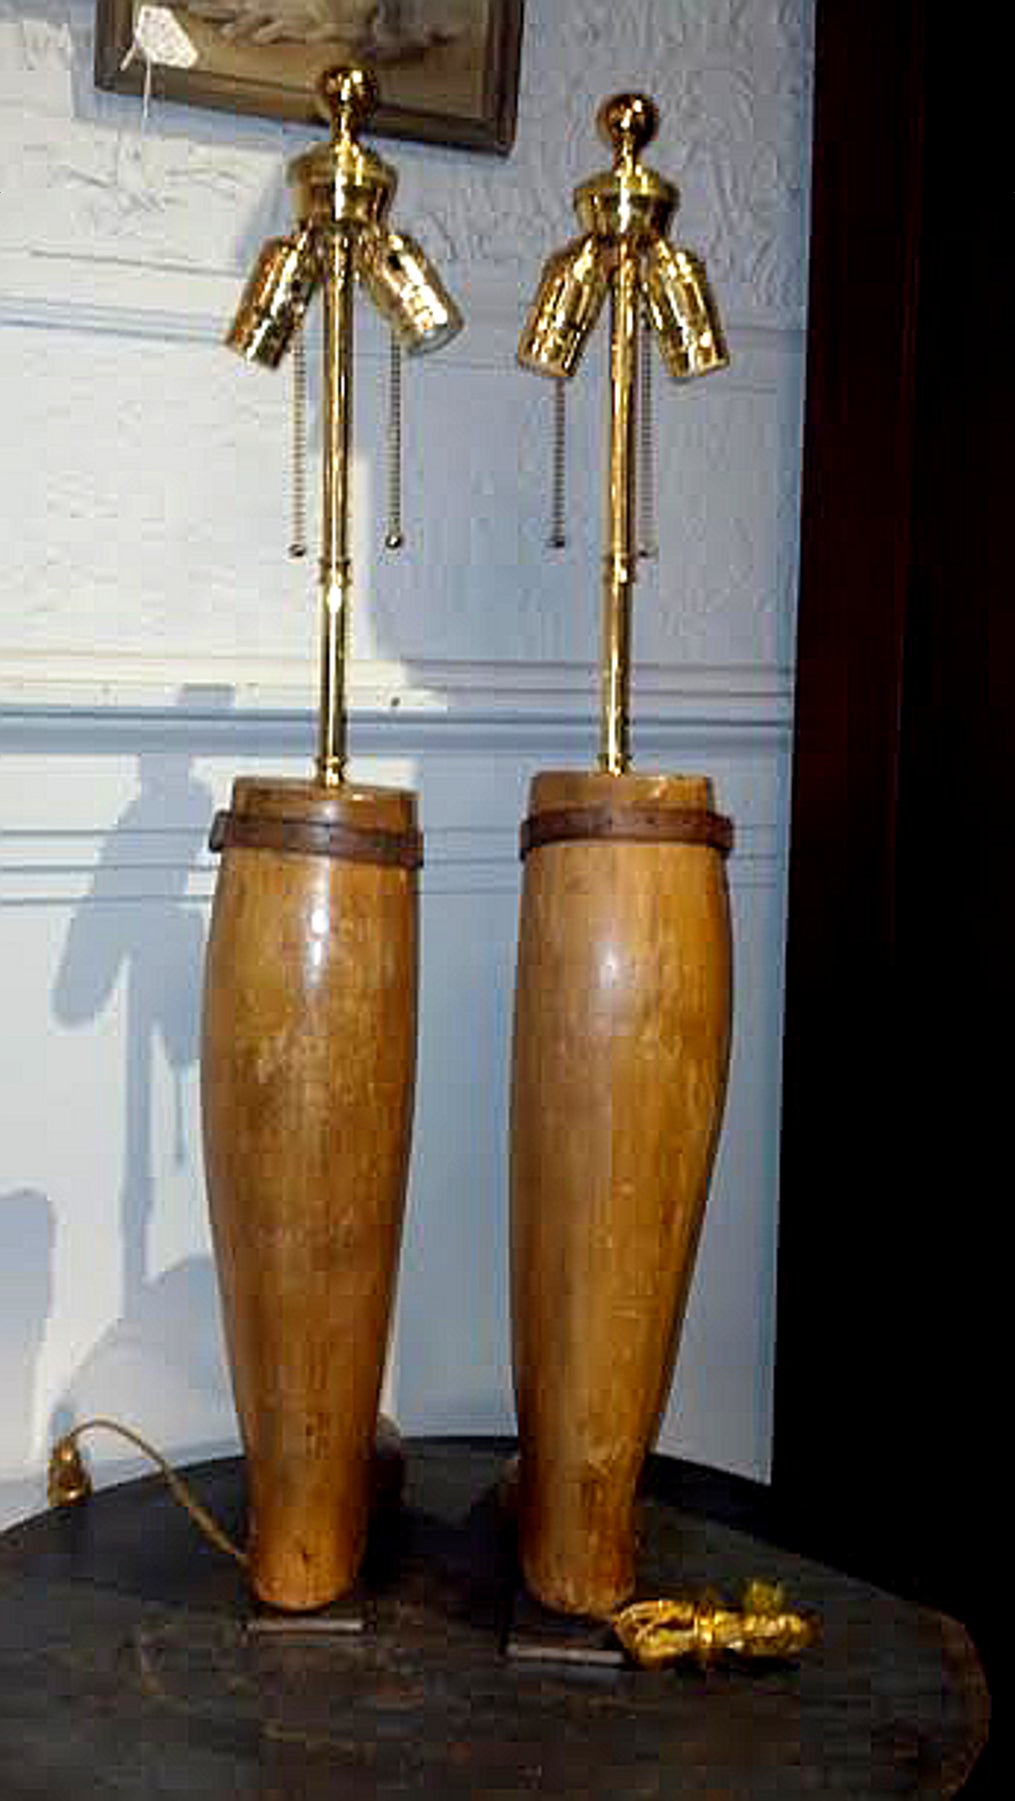 British A Pair of Early 19th Century Wood Boot Forms Mounted as Lamps